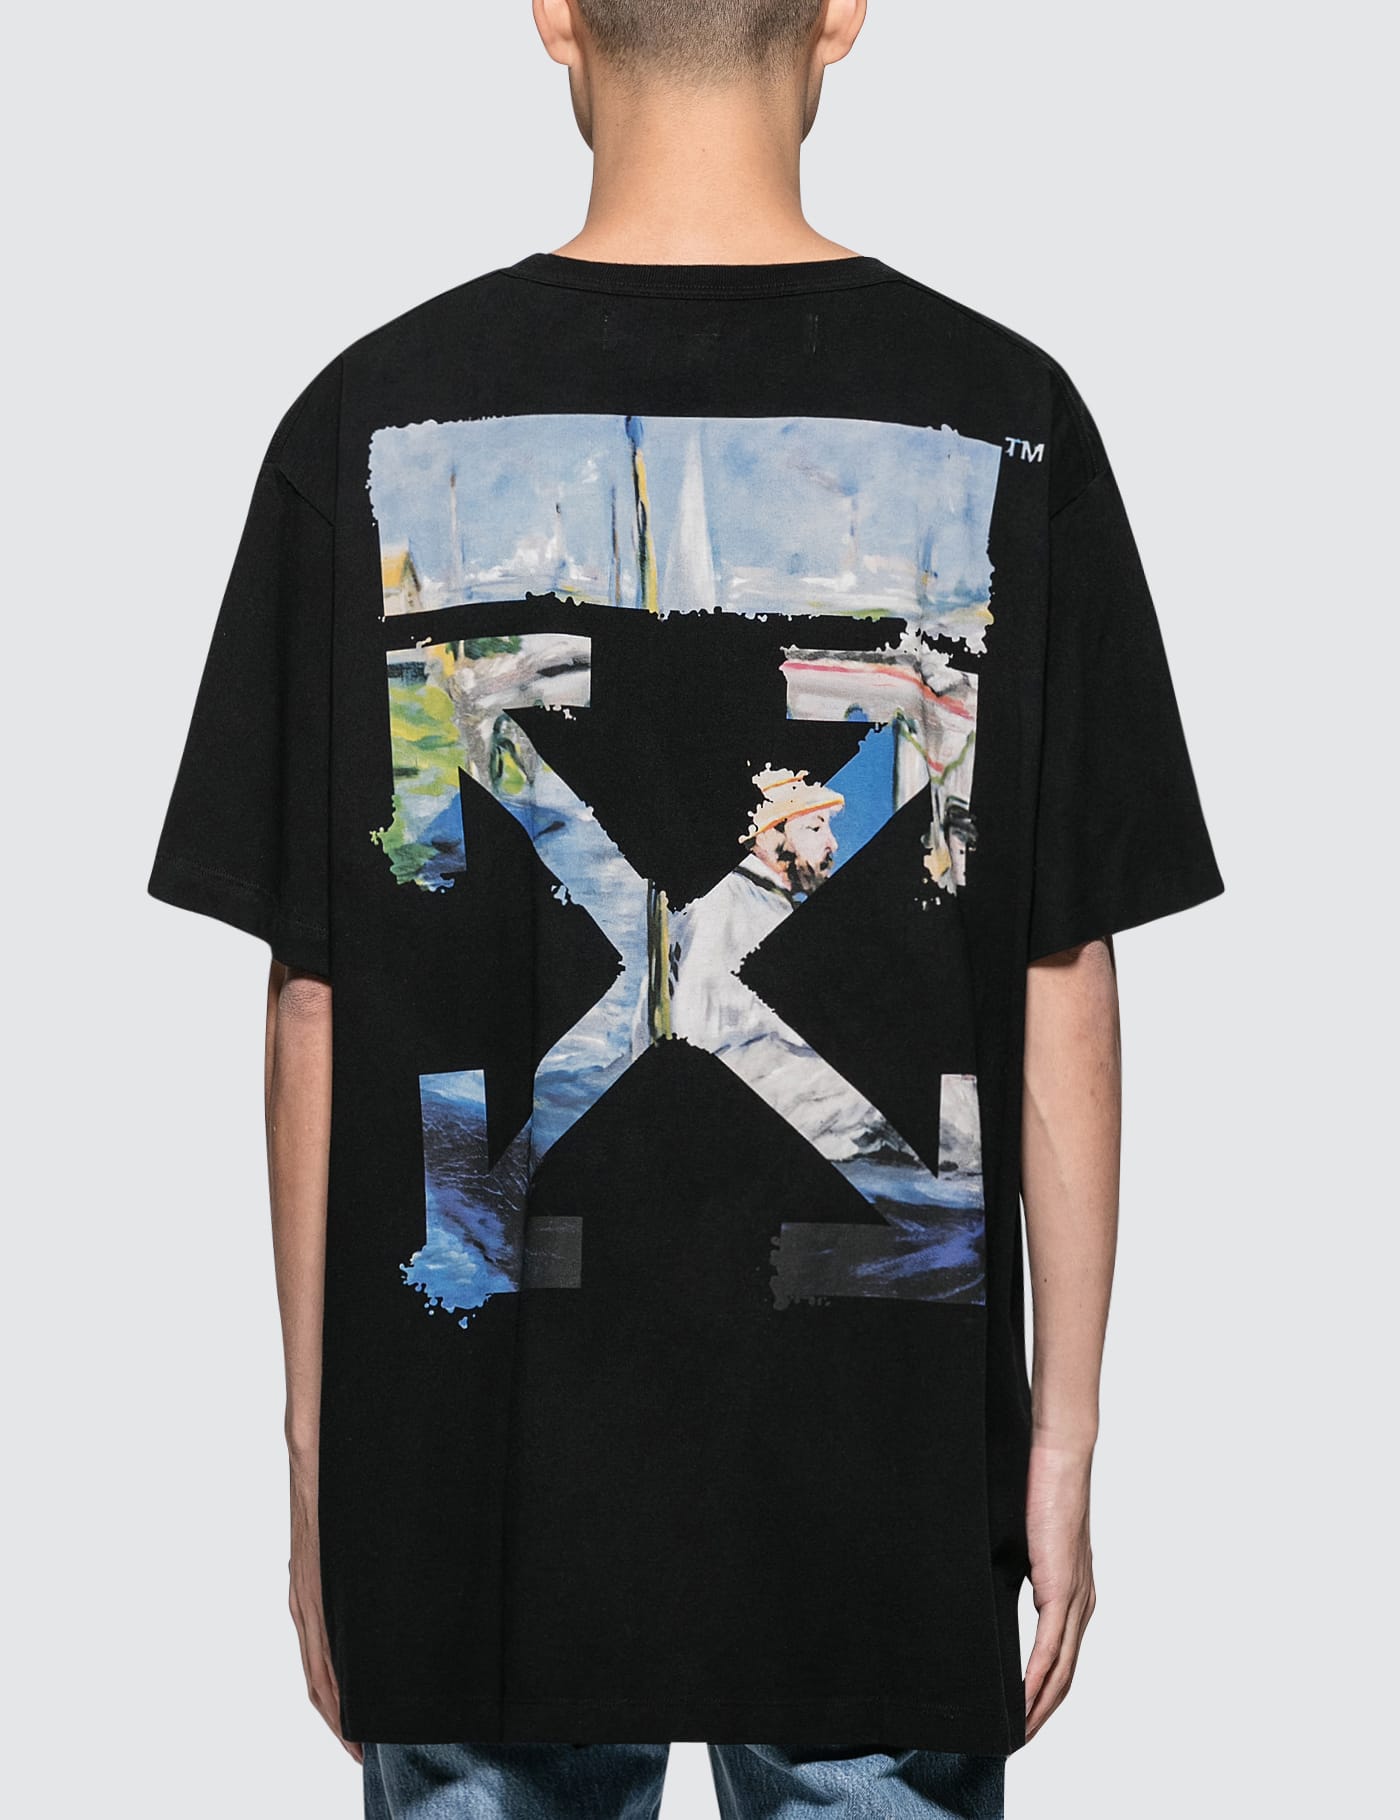 Off White™   Colored Arrows S/S Over T Shirt   HBX   HYPEBEAST 為您搜羅全球潮流時尚品牌